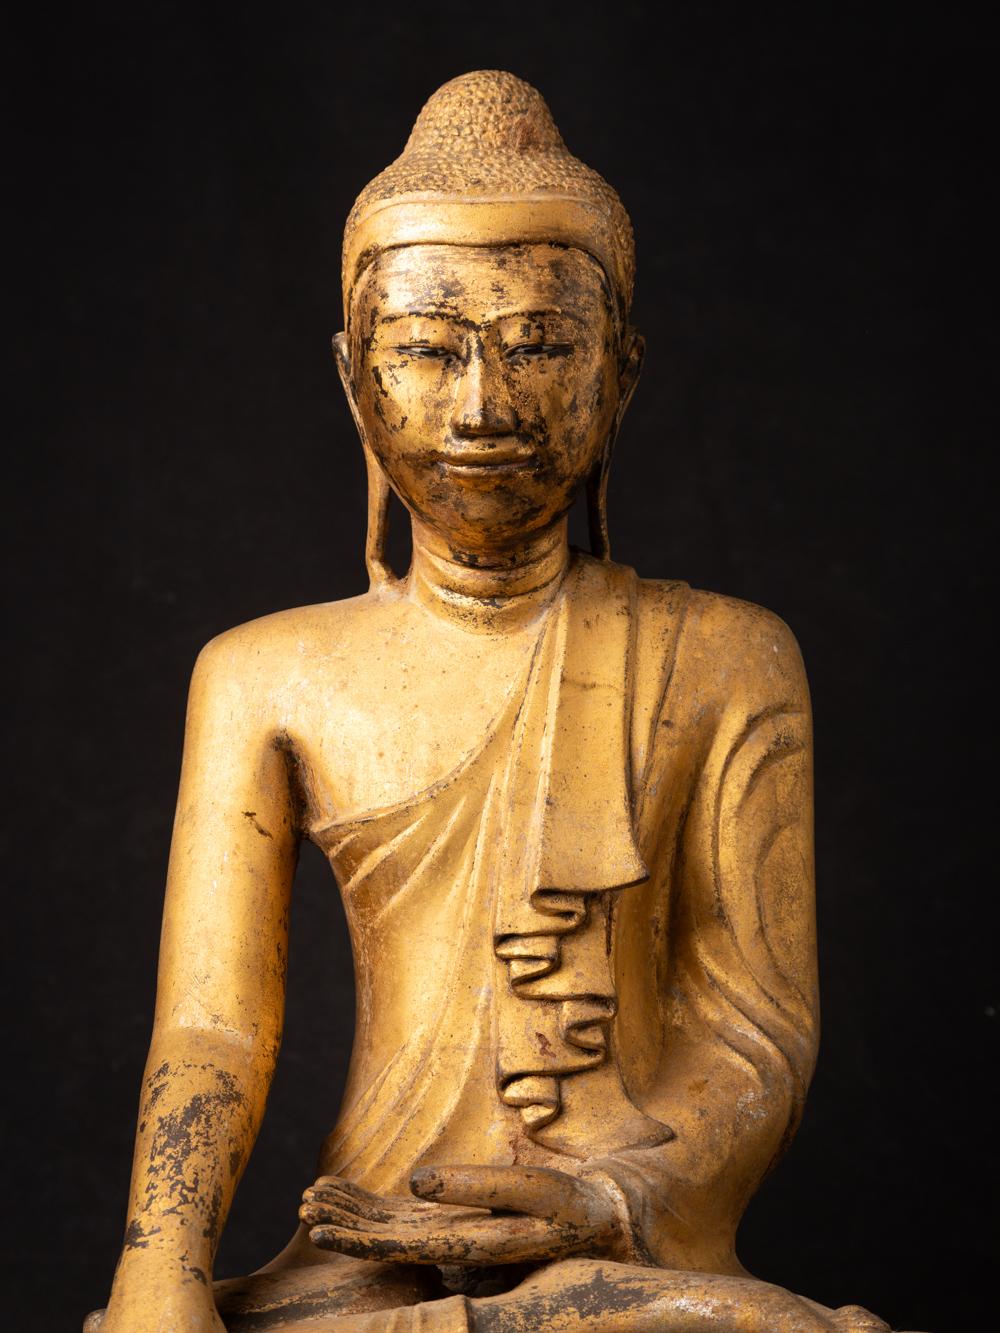 The antique bronze Burmese Mandalay Buddha is a captivating and sacred artifact originating from Burma. Crafted from bronze and gilded with 24-karat gold, this Buddha statue stands at 54 cm in height and measures 39 cm in width and 25.5 cm in depth.